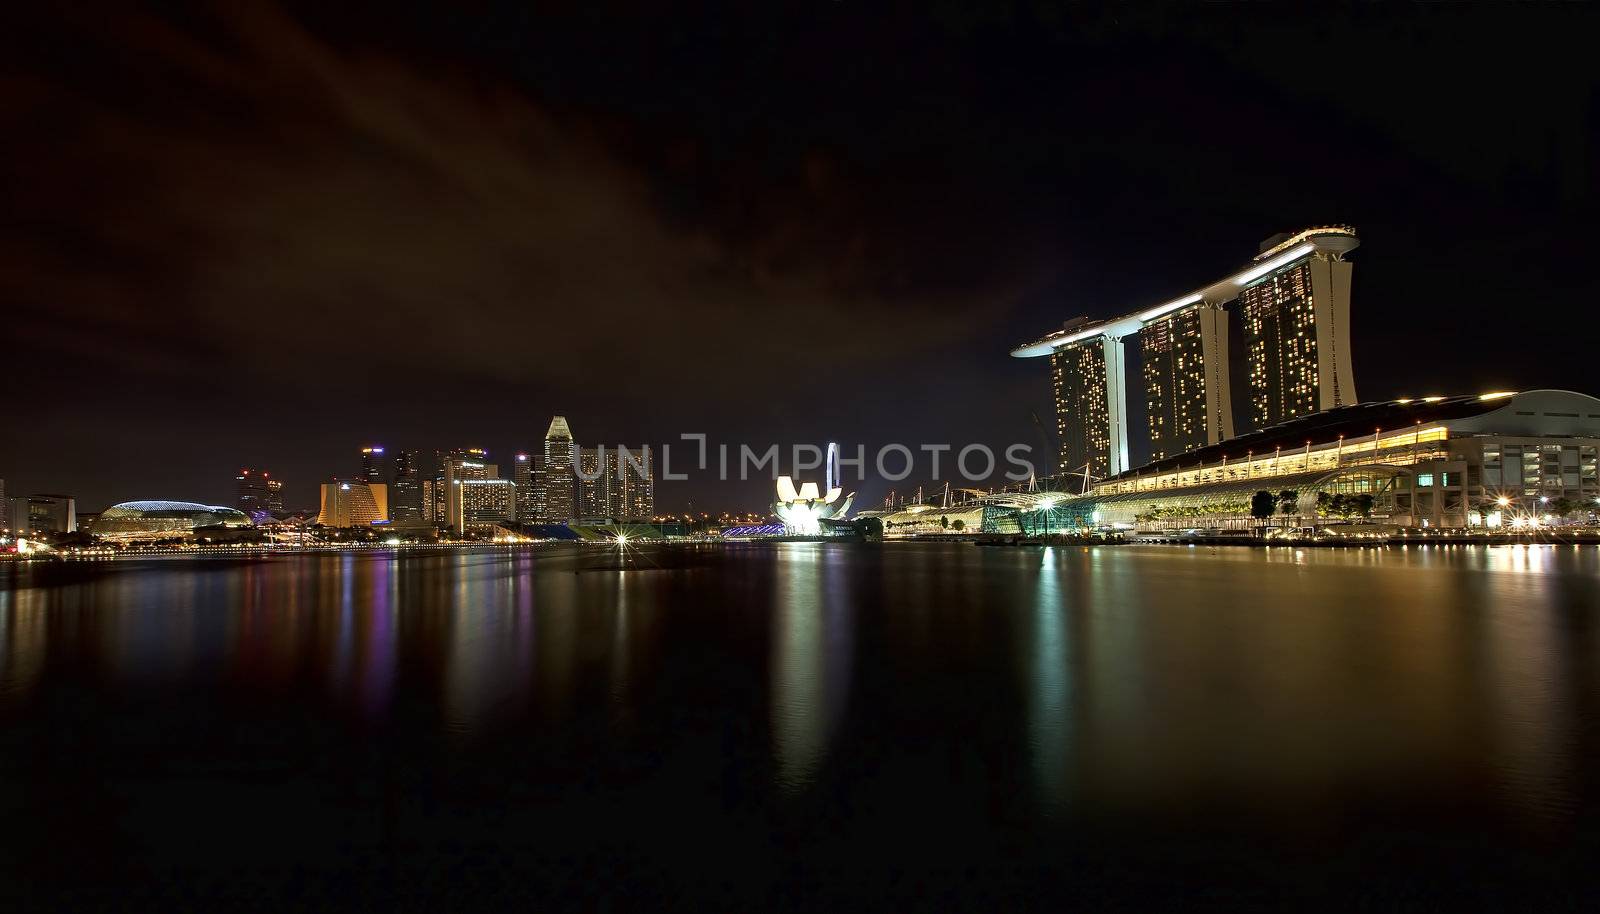 Night scene of financial district,Singapore. From the river.